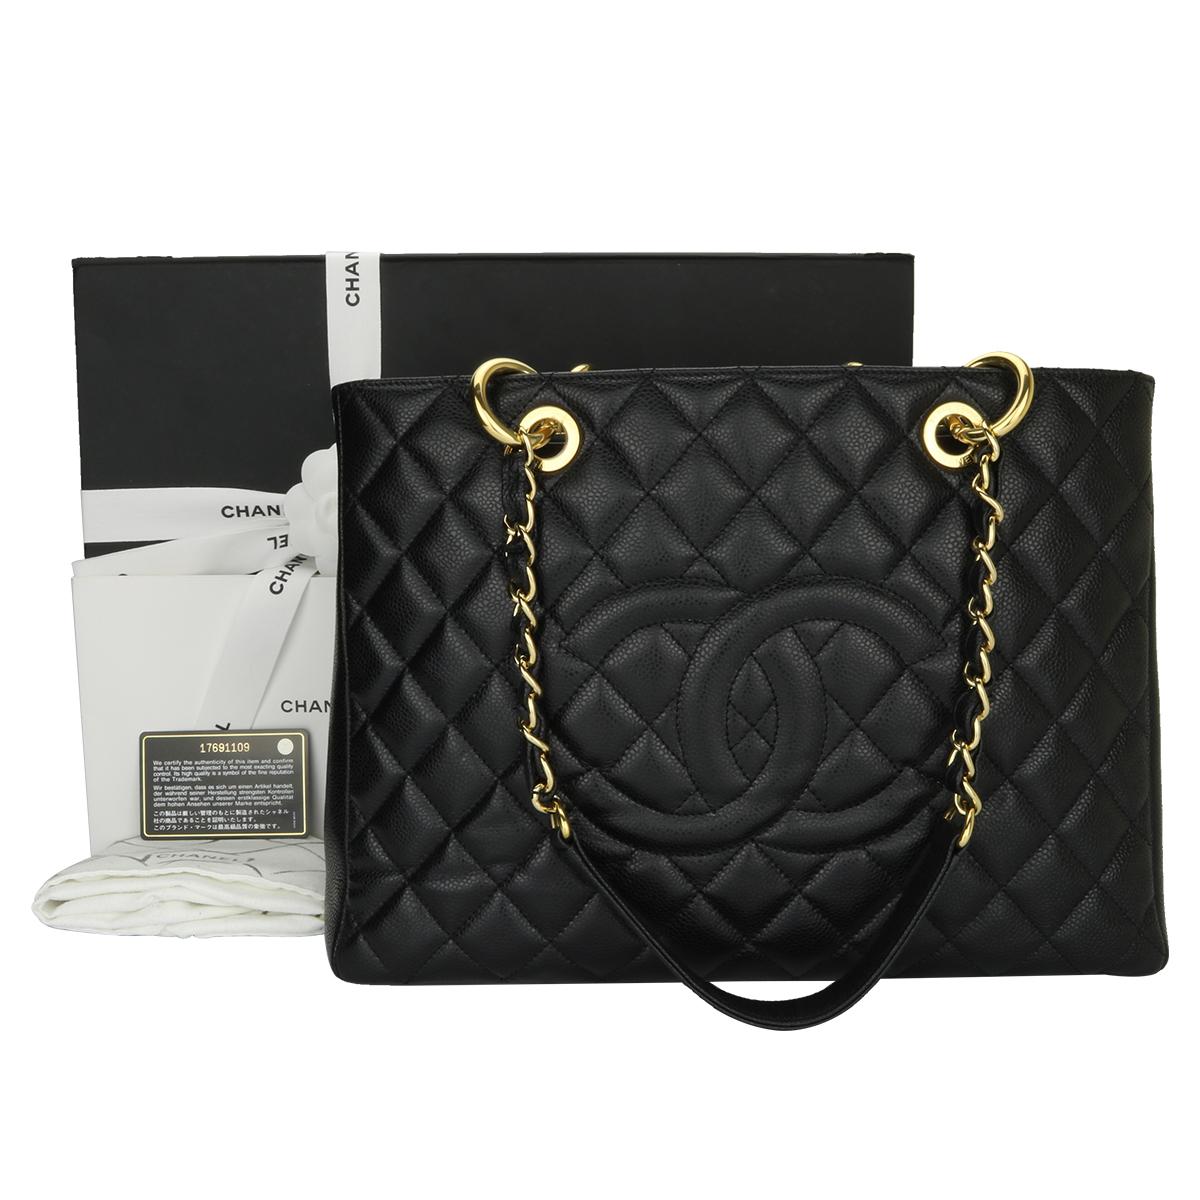 Authentic CHANEL Grand Shopping Tote (GST) Black Caviar with Gold Hardware 2013.

This bag is in excellent condition, the bag still holds its shape really well, and the hardware is still shiny.

Exterior Condition: Excellent condition, corners show